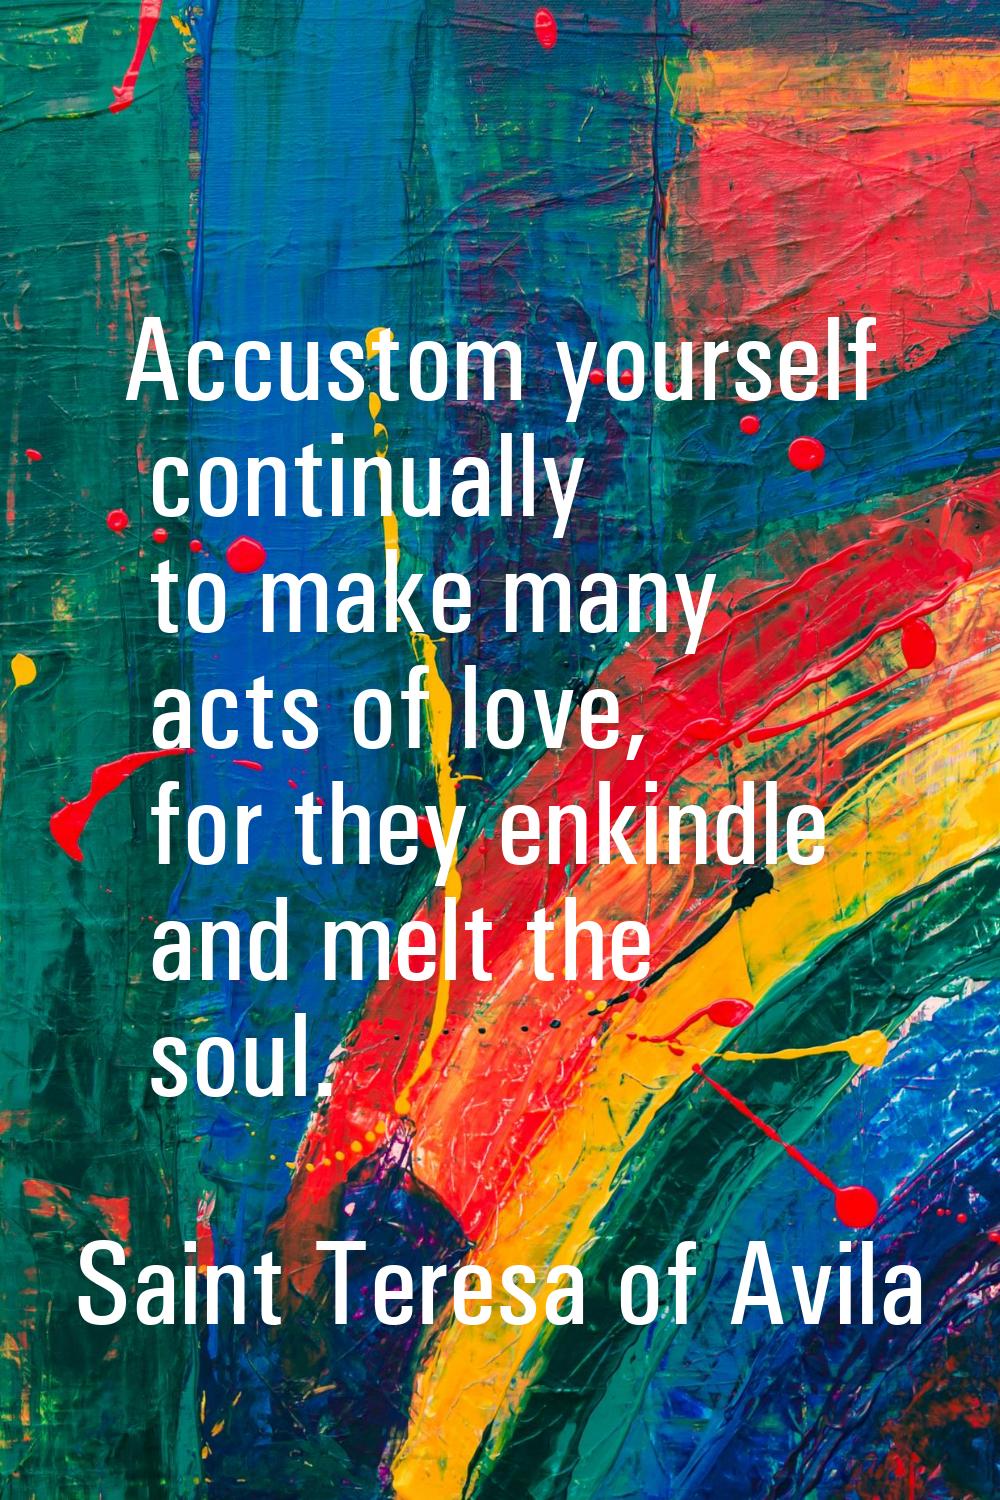 Accustom yourself continually to make many acts of love, for they enkindle and melt the soul.